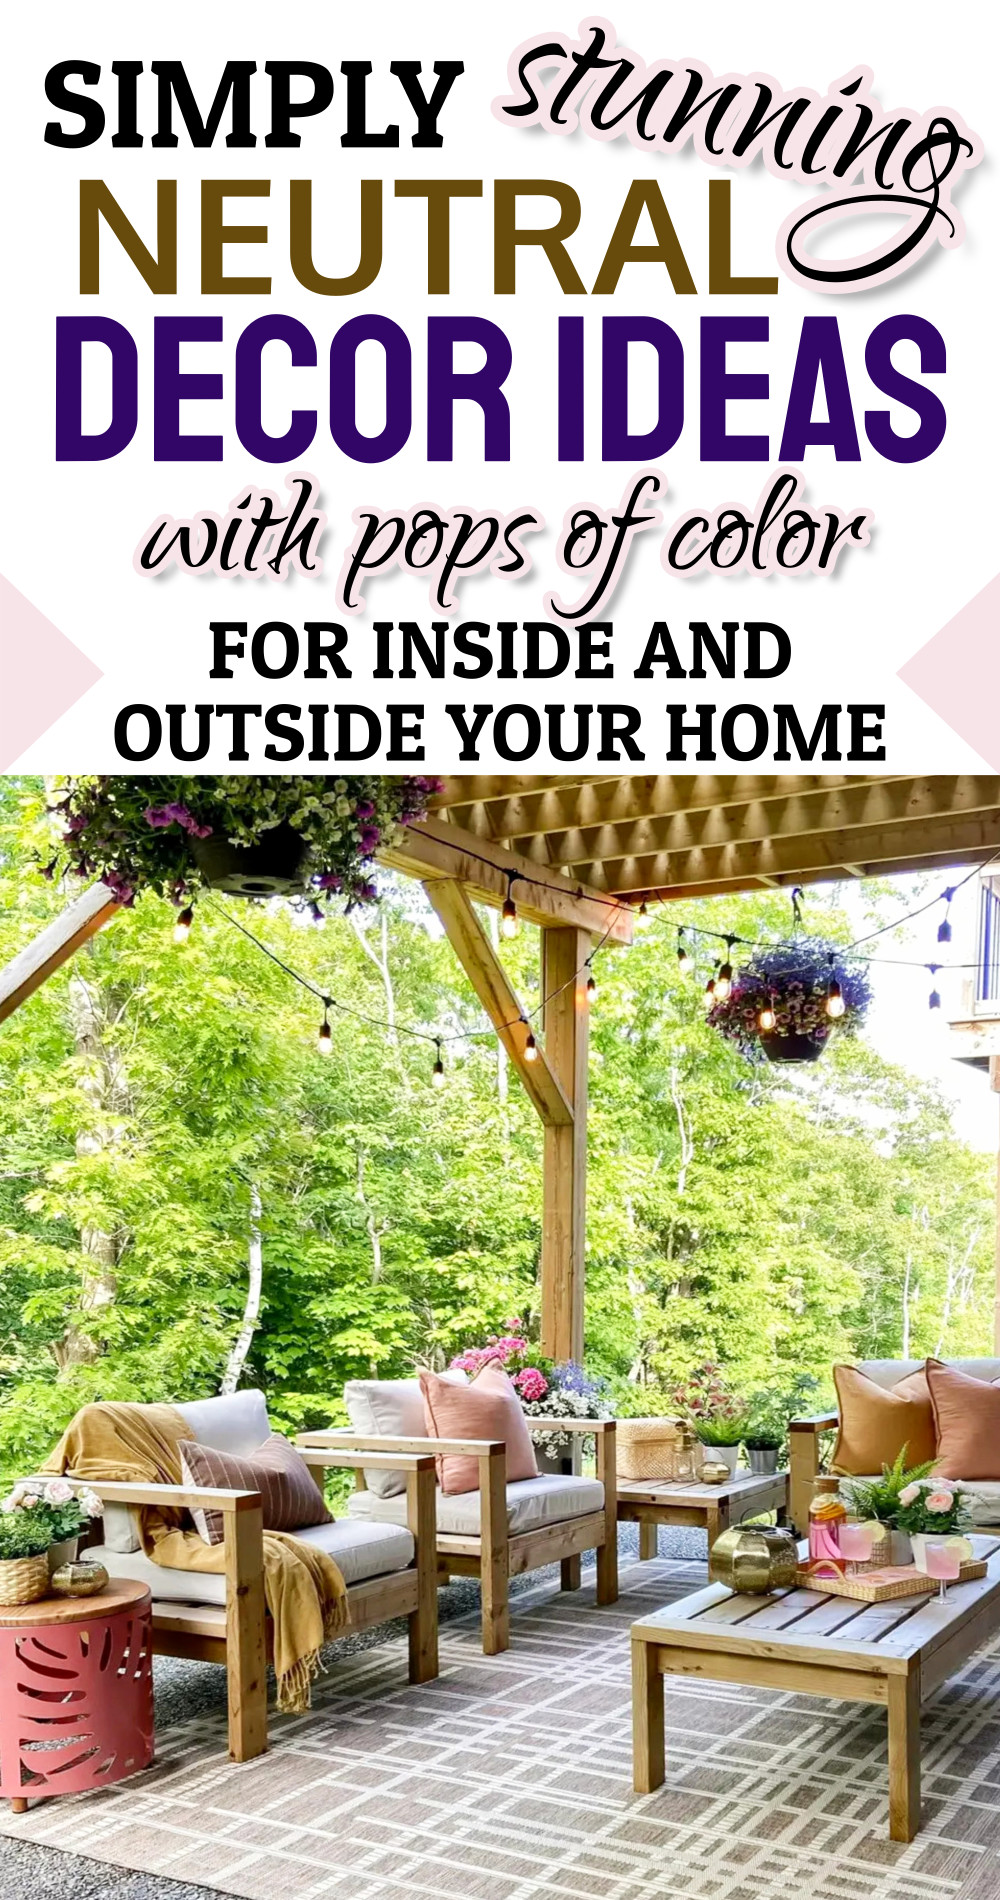 stunning neutral decor ideas with pops of color for inside and outside your home